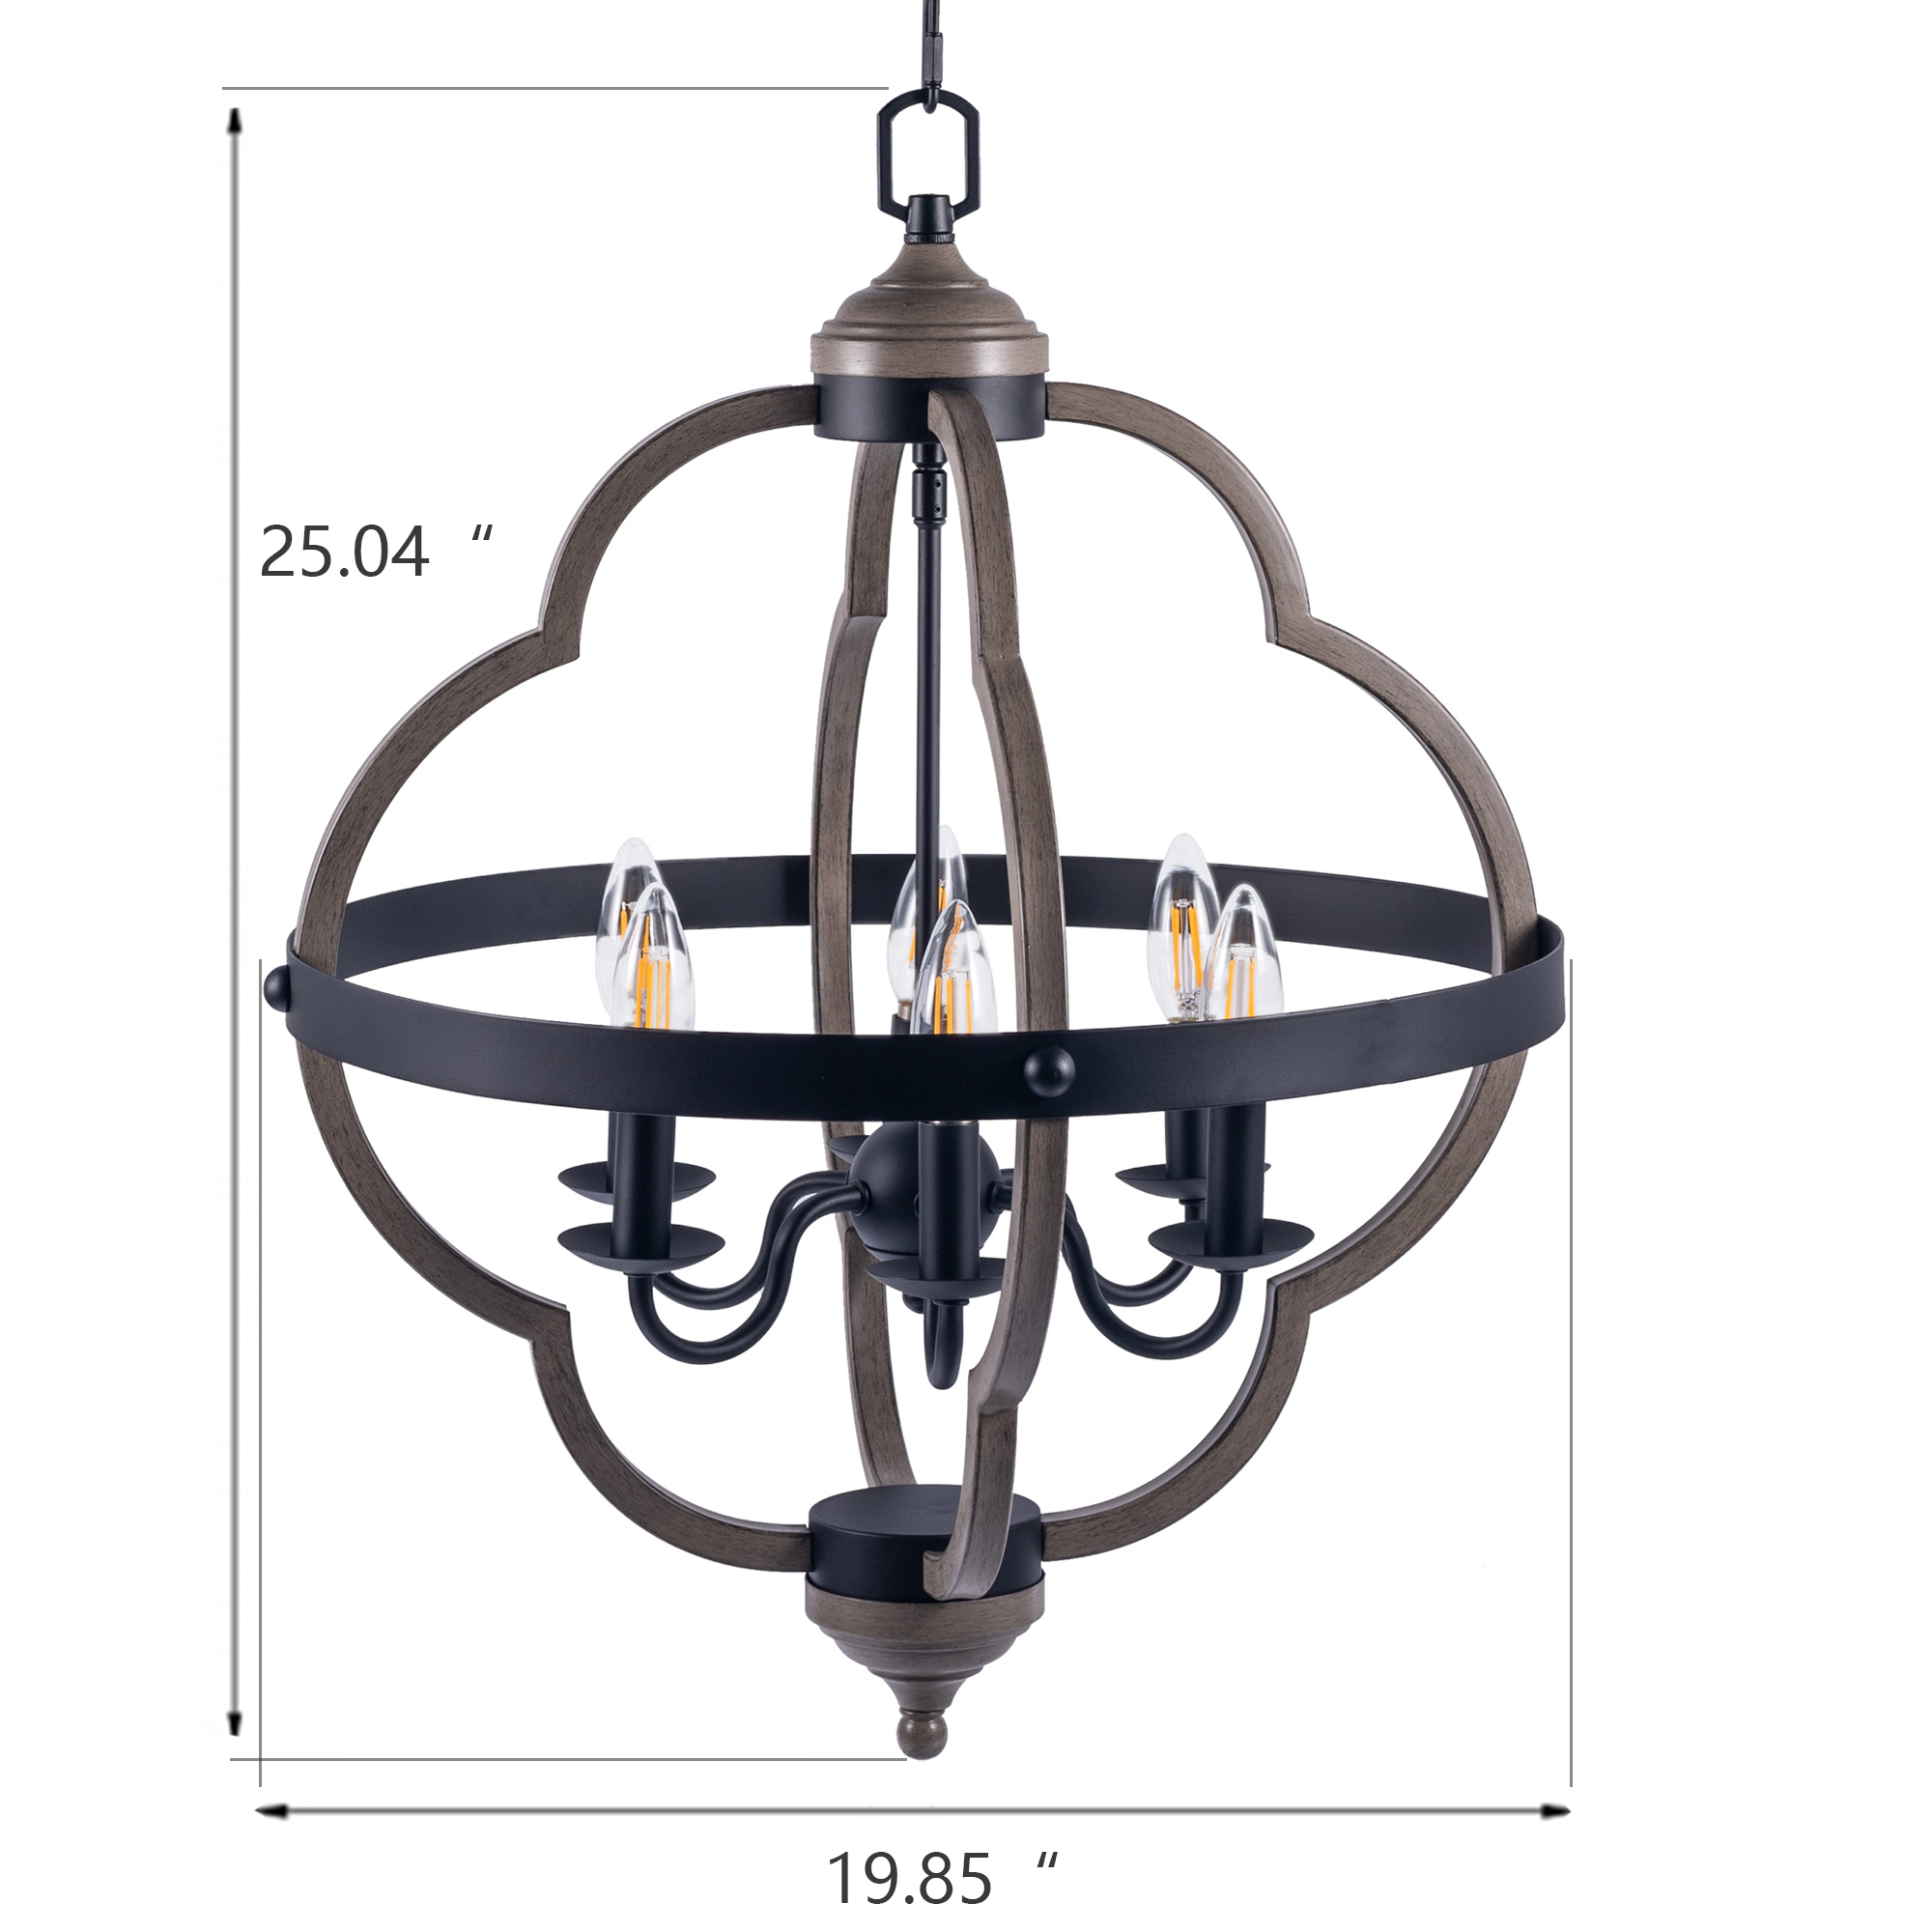 USA-Direct-6-Light-Candle-Style-Geometric-Chandelier-Industrial-Rustic-Indoor-Pendant-Light-Without--1877127-2